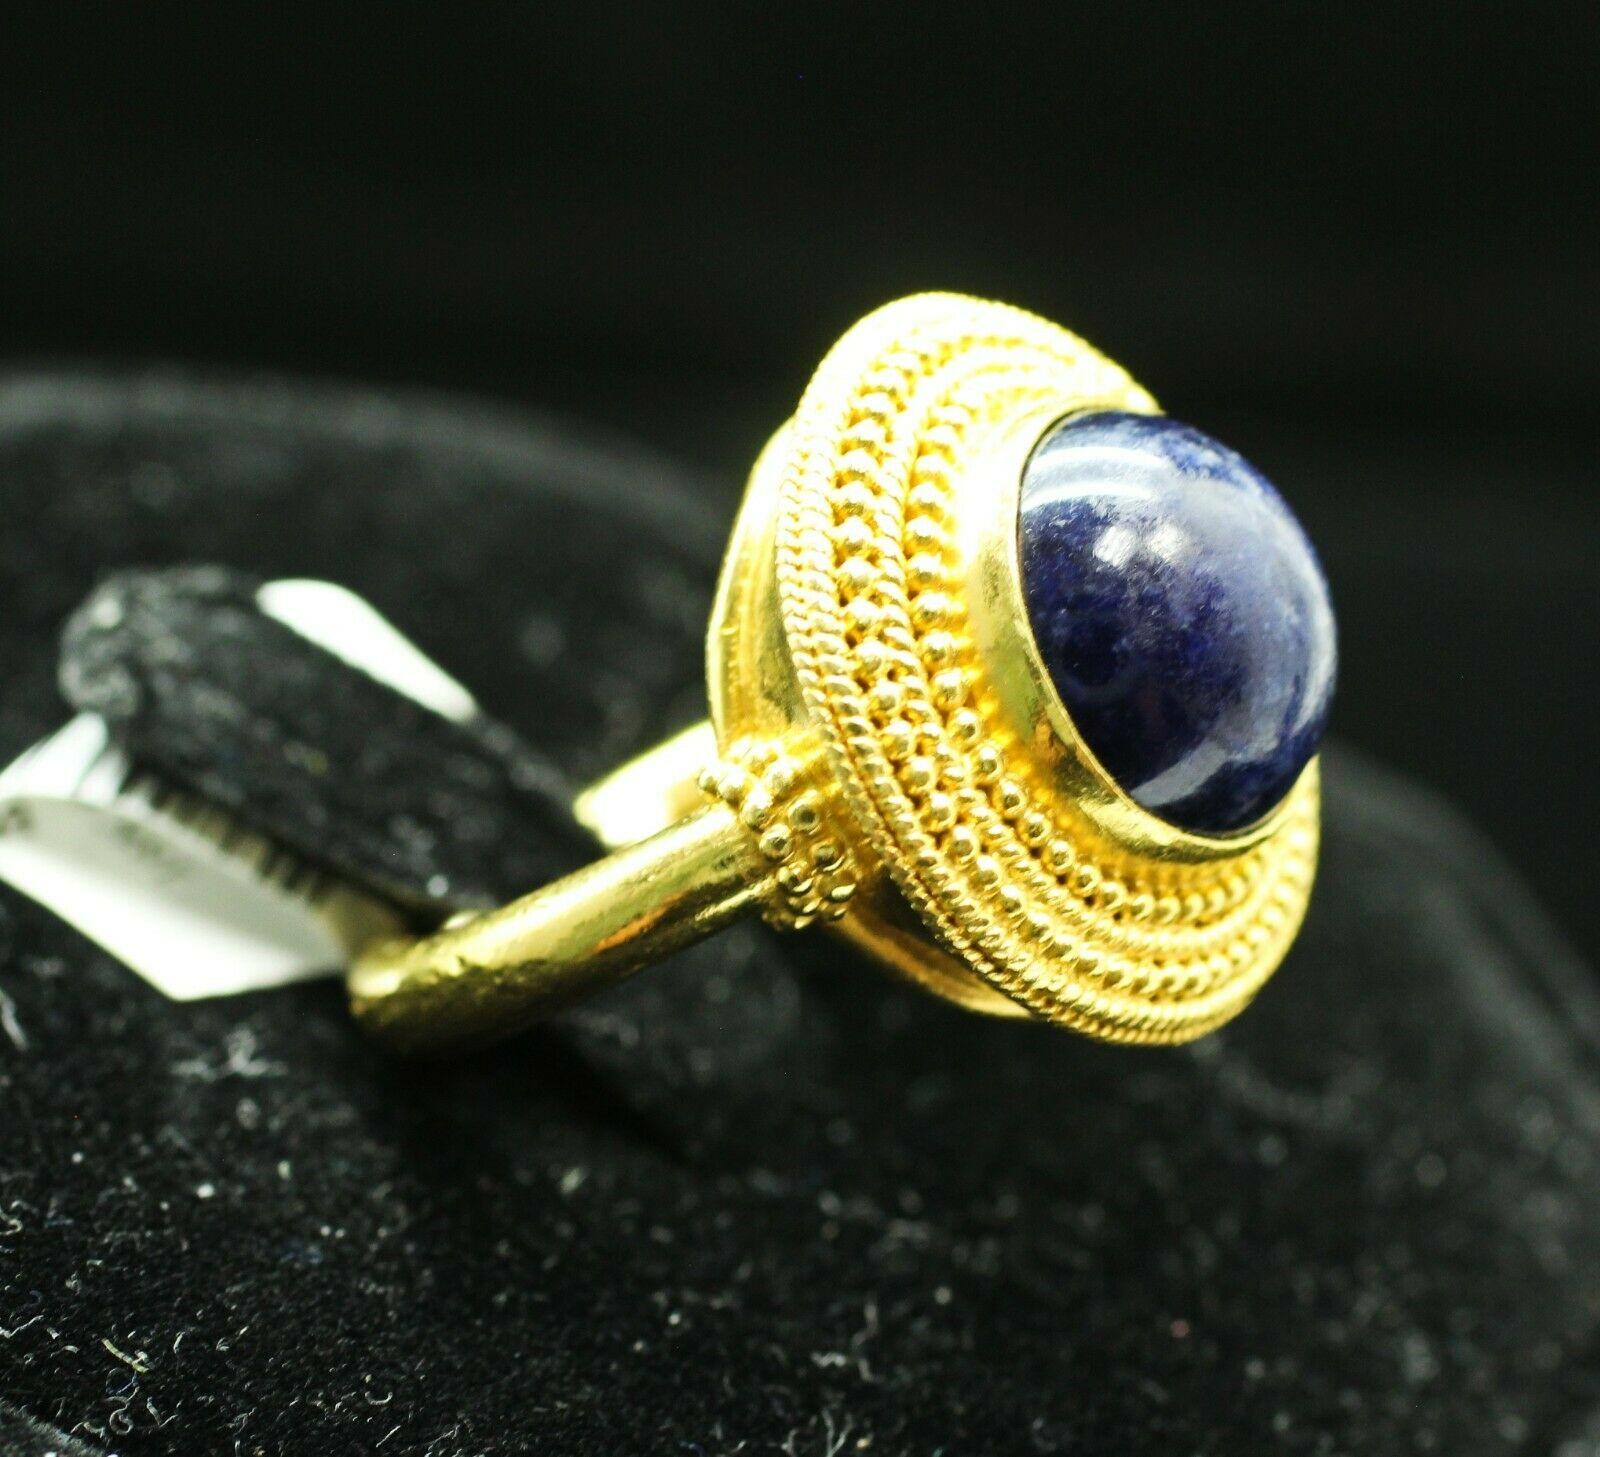  
Specifications:
    STONE: ROUND BLUE LAPIS LAZULI 11.20MM
    type: VINTAGE STYLE
    metal: 18K YELLOW GOLD
    SIZE: 3.25
    WIDTH/THICK: 119.6MM-11.25MM
    WEIGHT: 9.97GRS